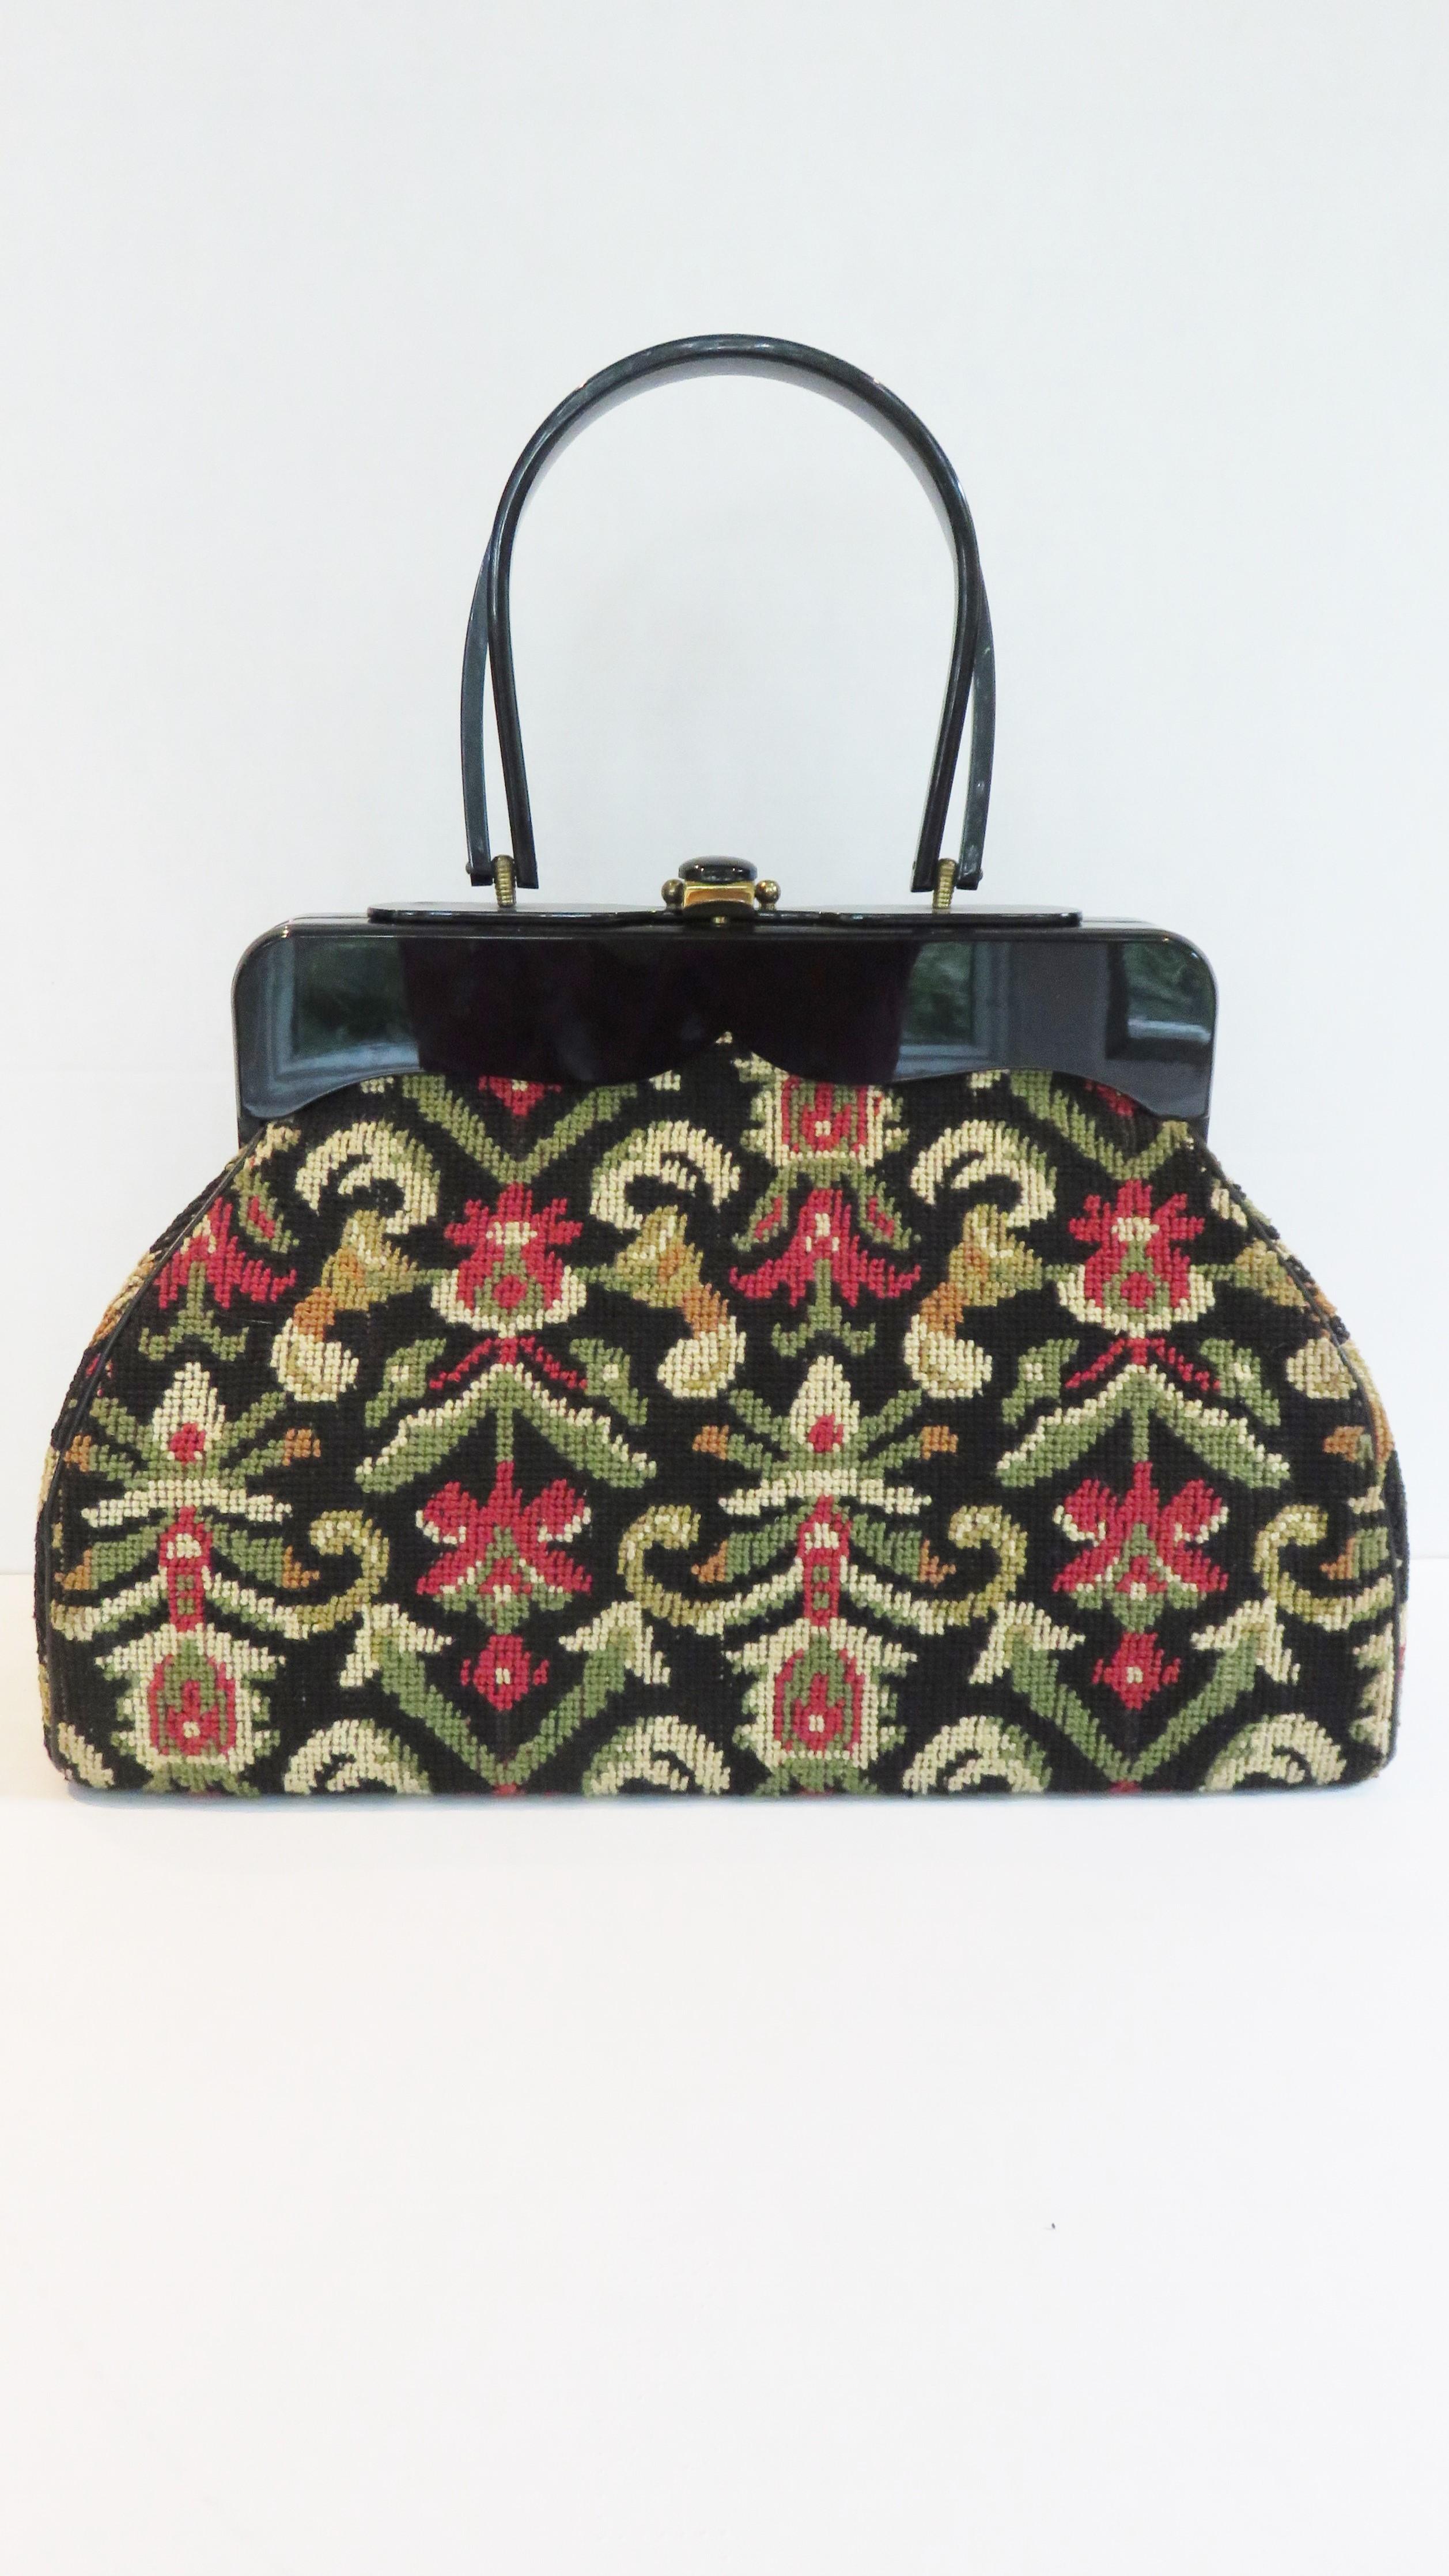 A gorgeous large needlepoint handbag in a green, yellow and red abstract pattern on a black background. It has a shapely black Lucite frame, double rounded top handles, and gold clasp with a black button. It is silk lined with 2 inner